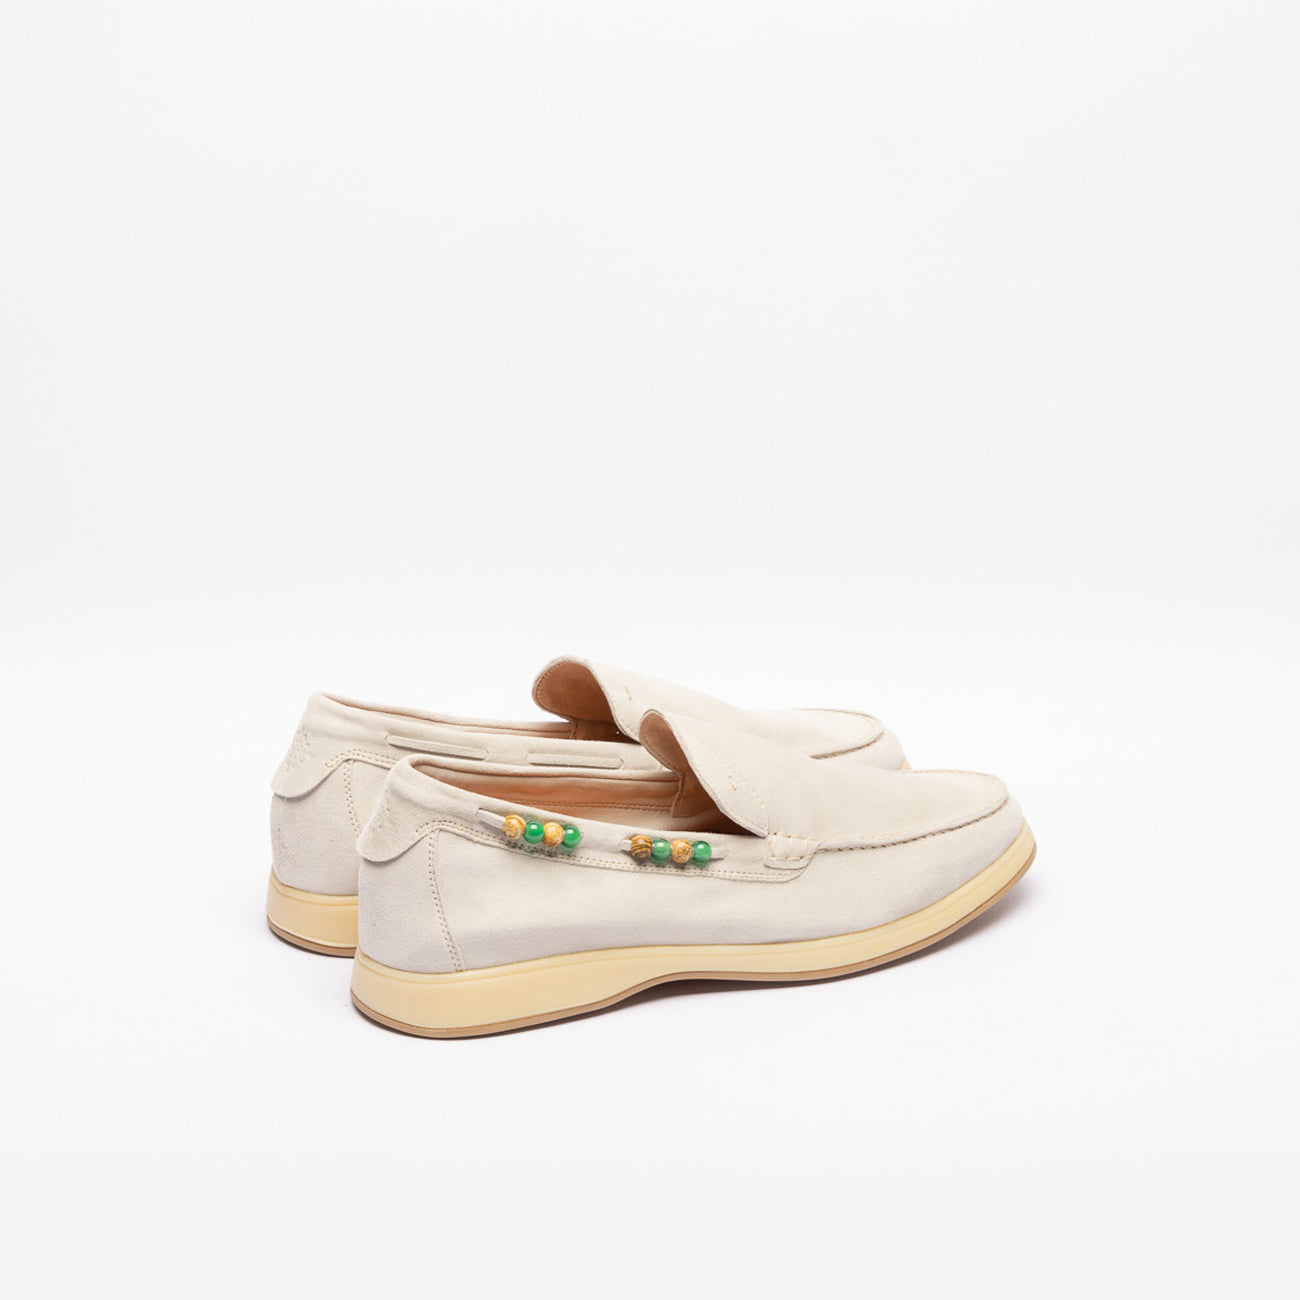 A. Ventura Aquariva Pearl slip-on ivory suede loafer